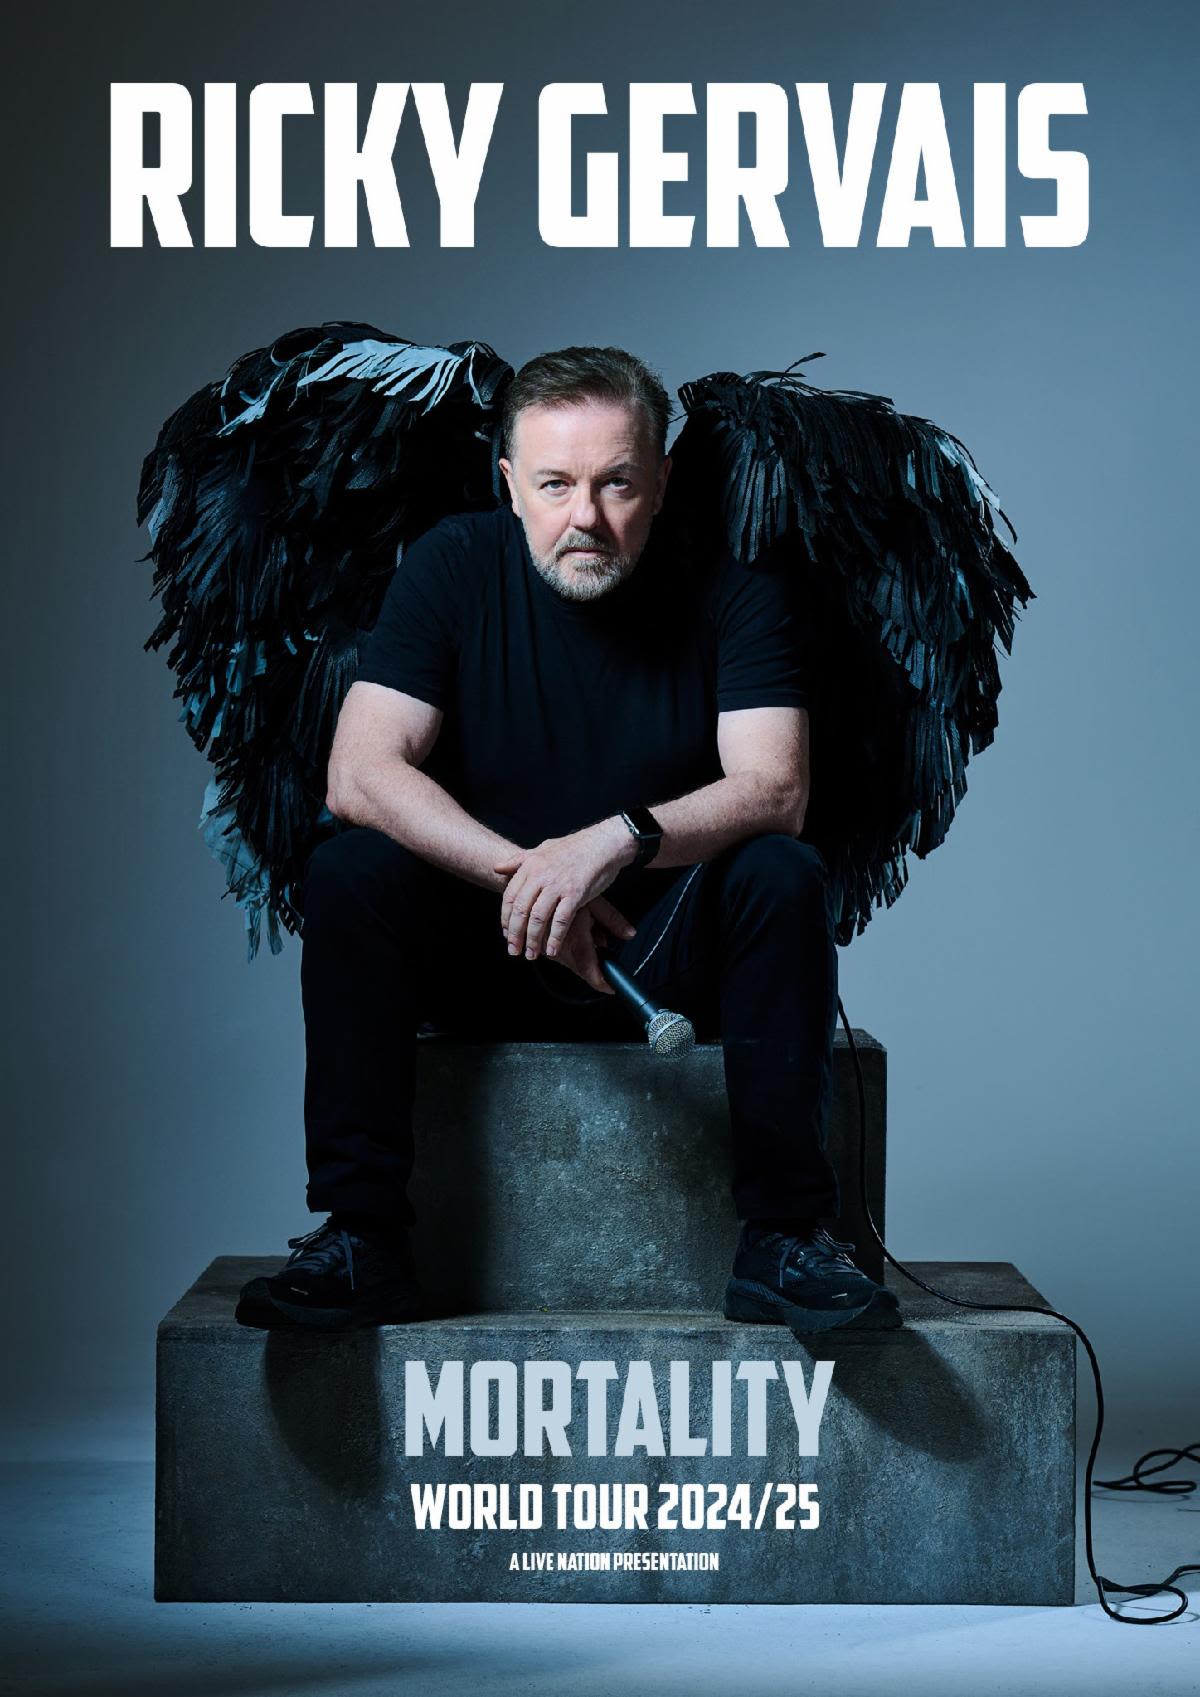 Ricky Gervais’ Next Tour and Netflix Special Is ‘Mortality’: ‘We’re All Gonna Die, May As Well Have a Laugh About It’